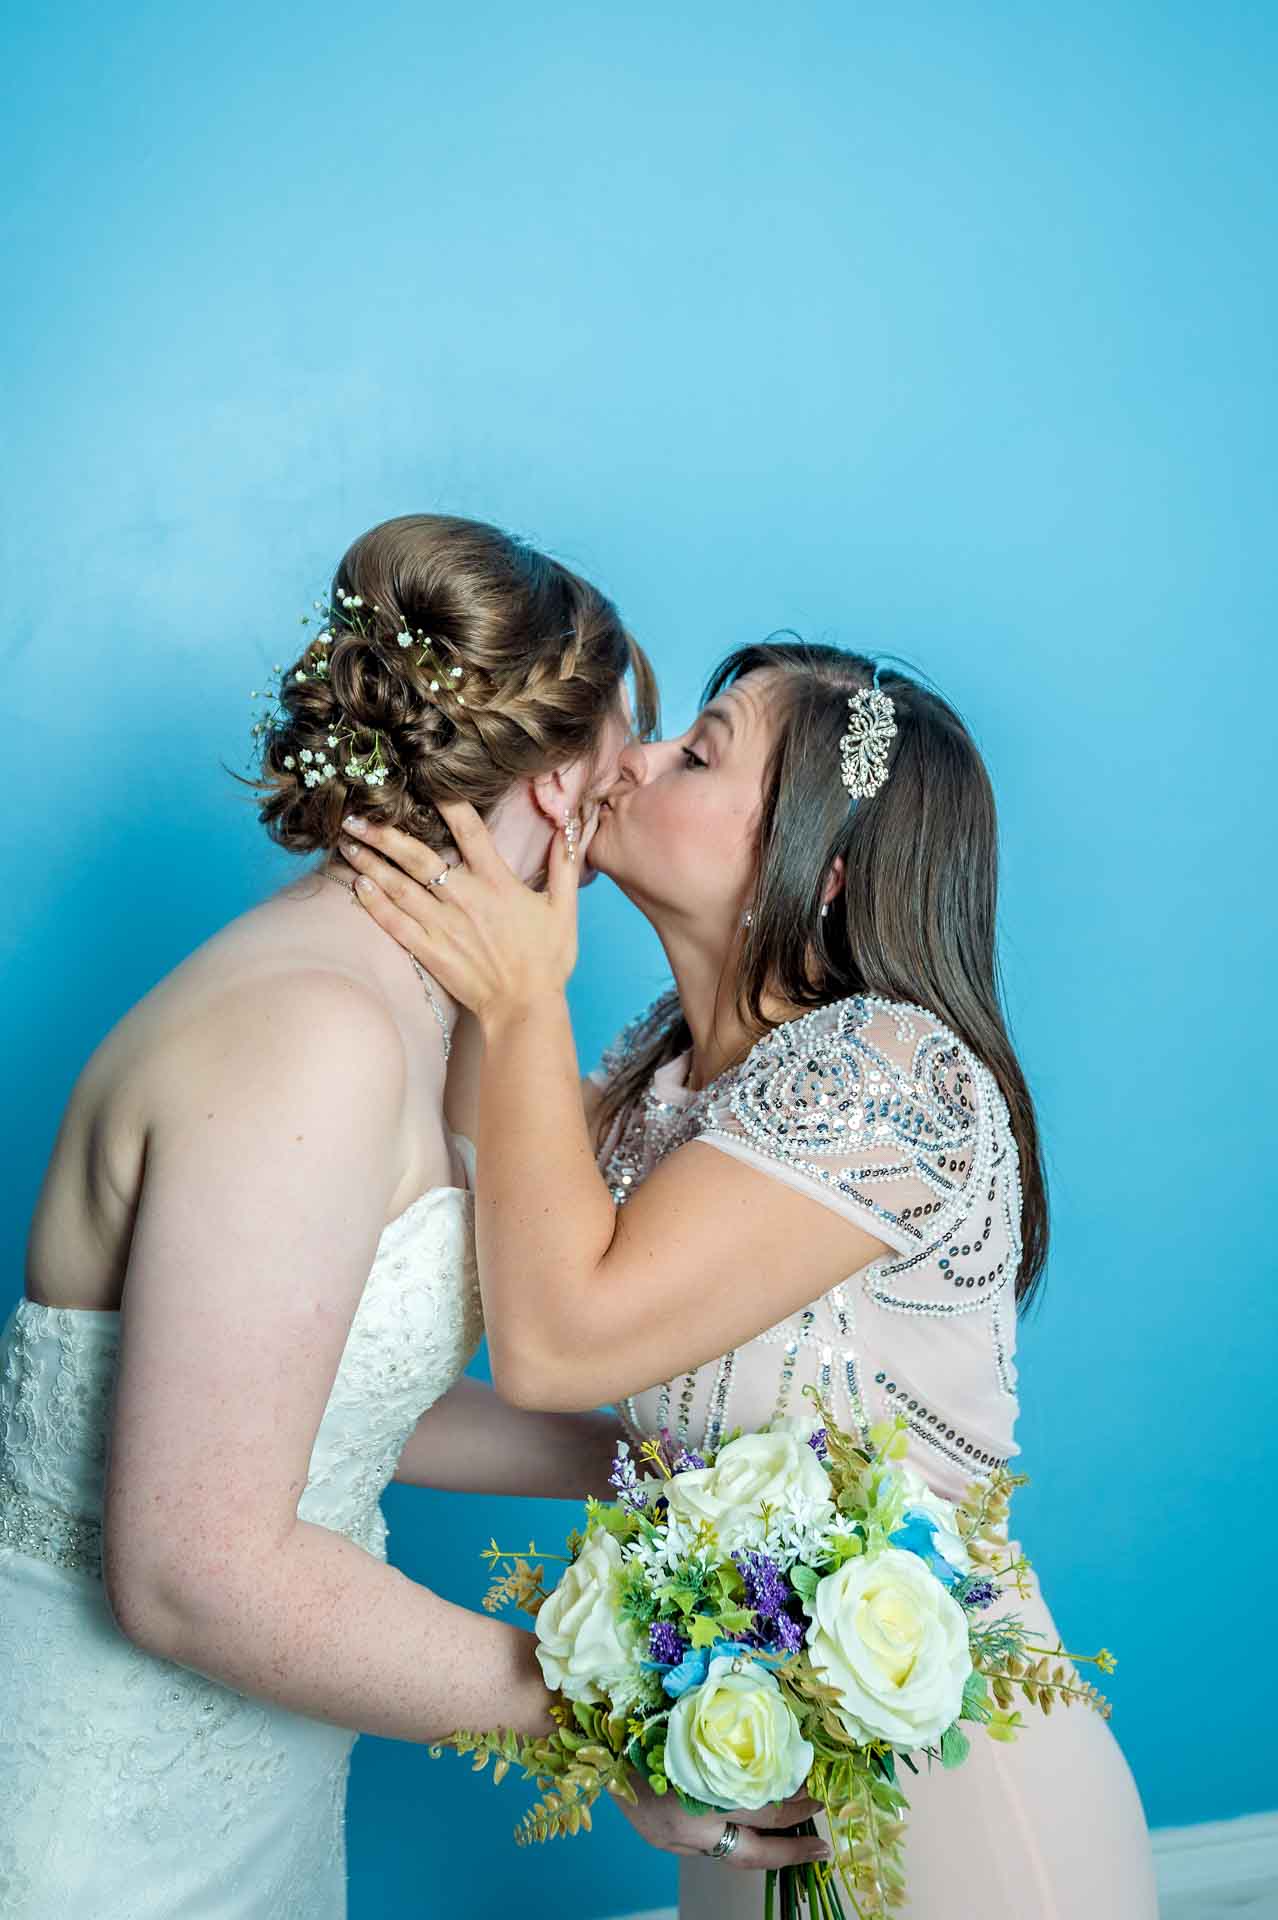 Sister kissing bride at City Hall marriage, Cardiff